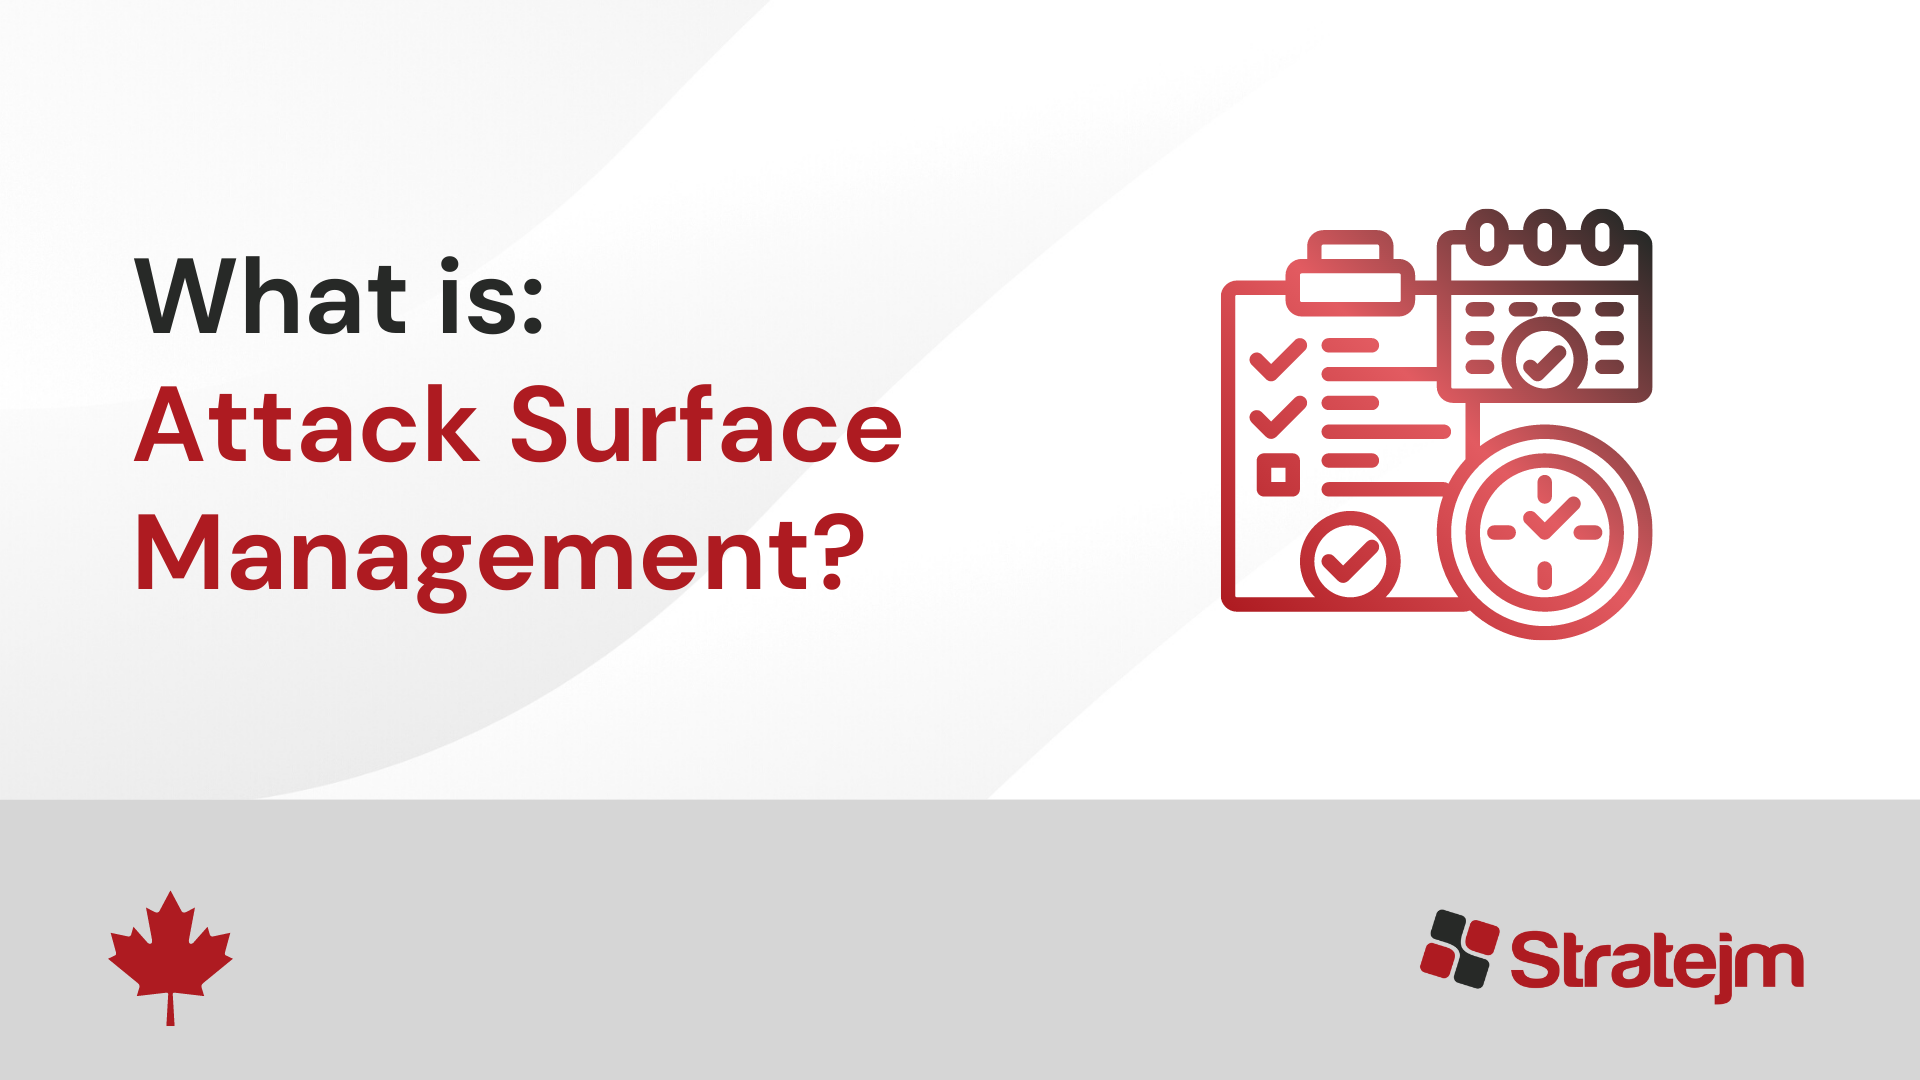 How Attack Surface Management enhances existing security controls